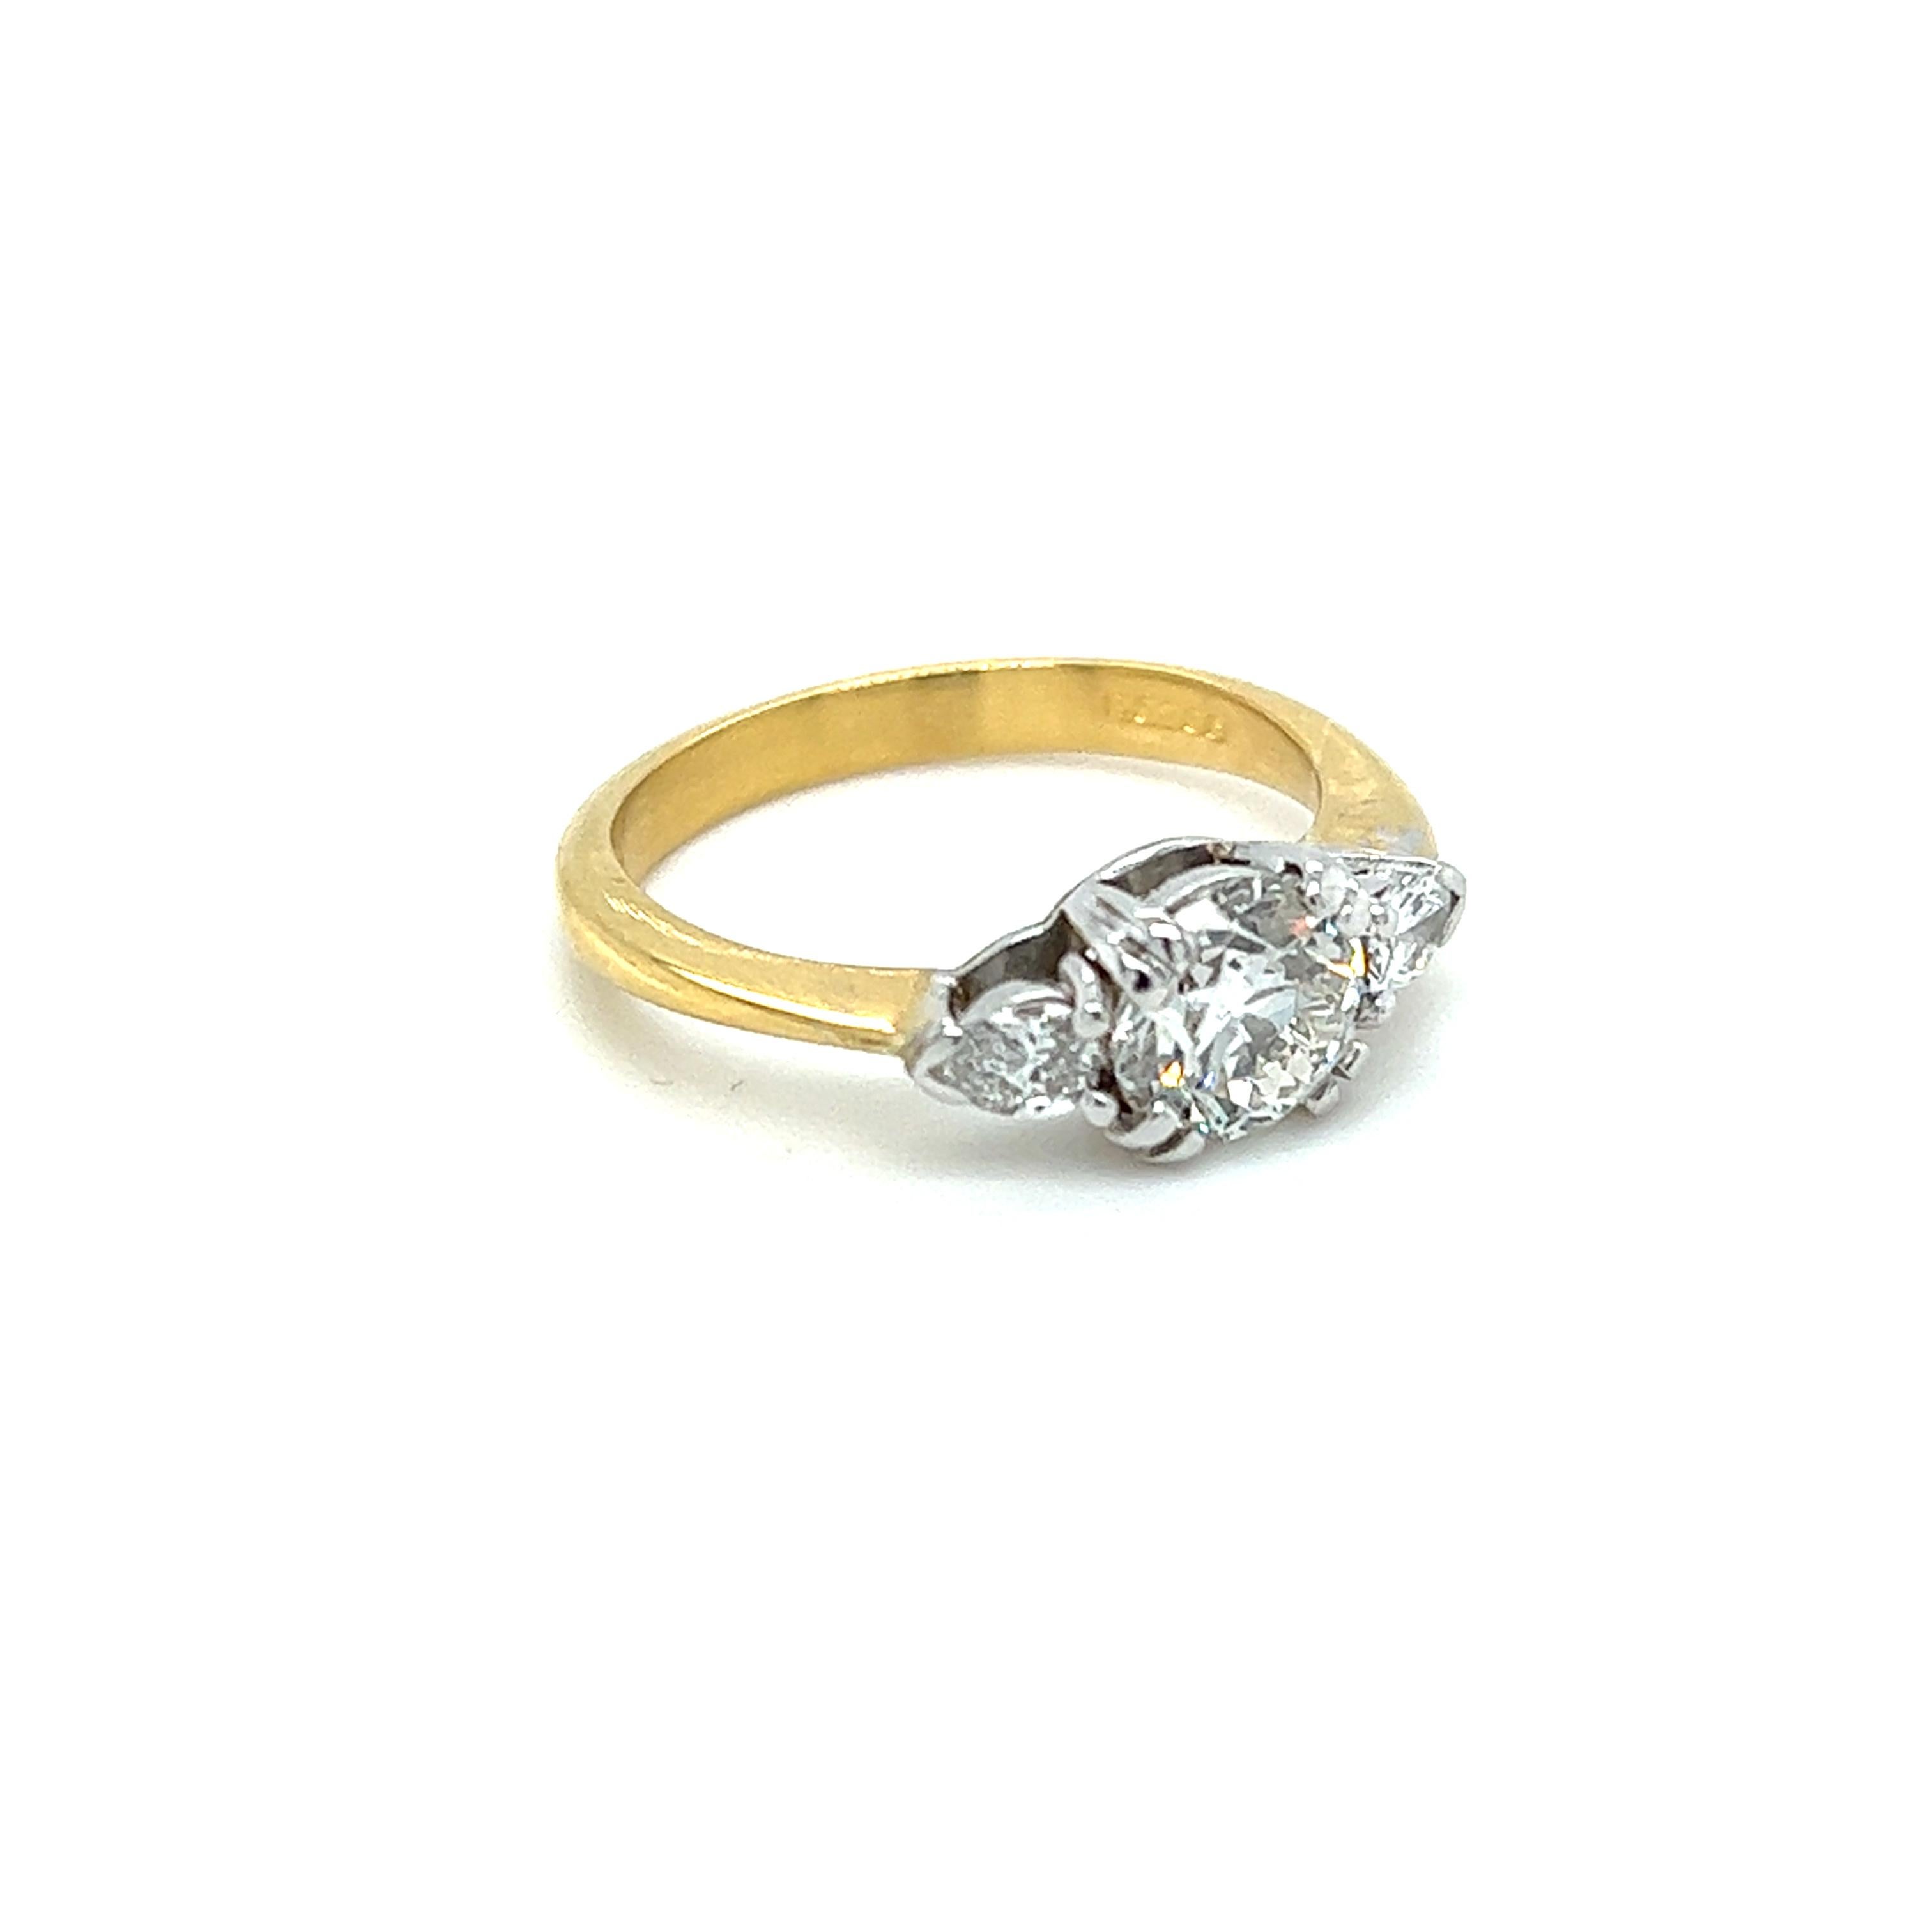 1.42ctw Old European Cut Diamond Engagement Ring in 18k White and Yellow Gold In Good Condition For Sale In Towson, MD